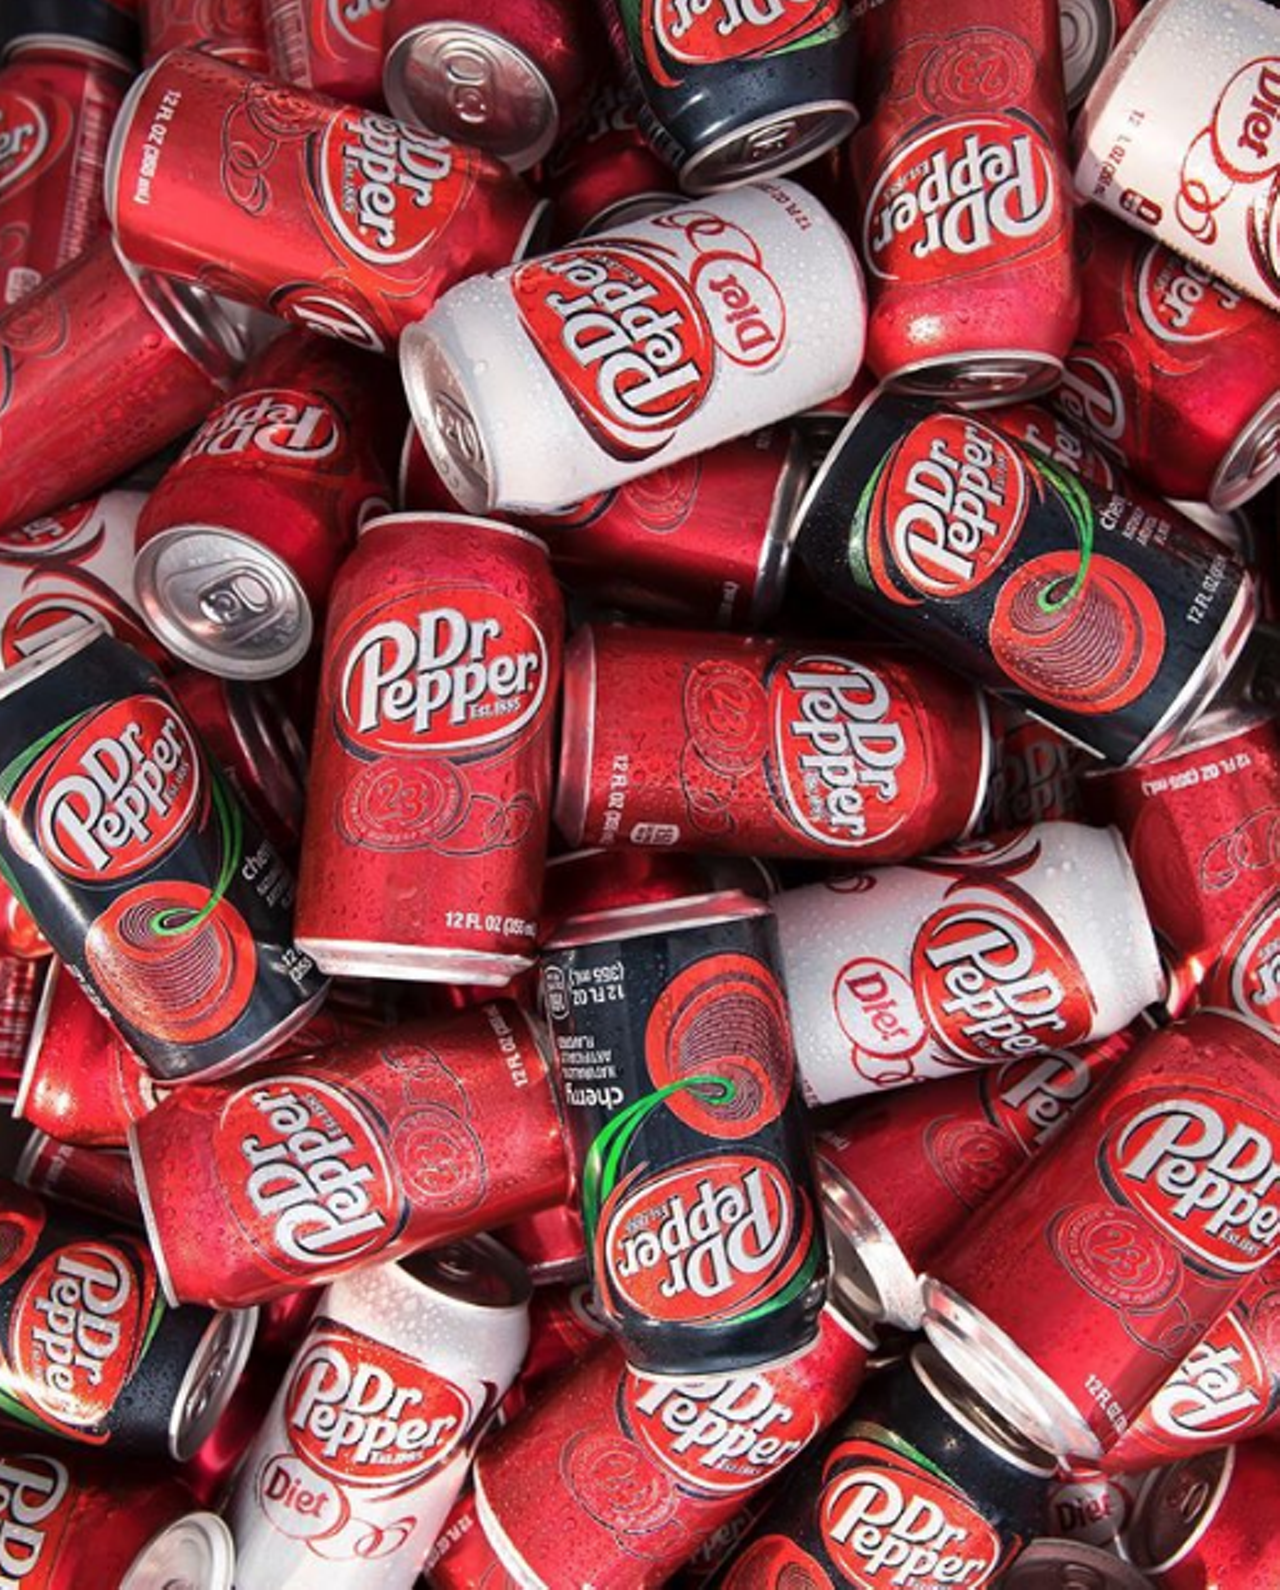 Dr Pepper has an interesting origin story.
You may know that Dr Pepper, the unofficial soft drink of Texas, was first made in Waco, but did you know that it was created by a pharmacist? Charles Alderton was just a young man working at Morrison’s Old Corner Drug Store when he decided to mix his two interests: medicine and carbonated drinks. So, he eventually created a soft drink that was made of the fruit syrup flavors and smelled like the pharmacy he worked out. And there you have it, Dr Pepper.
Photo via Instagram / drpepper